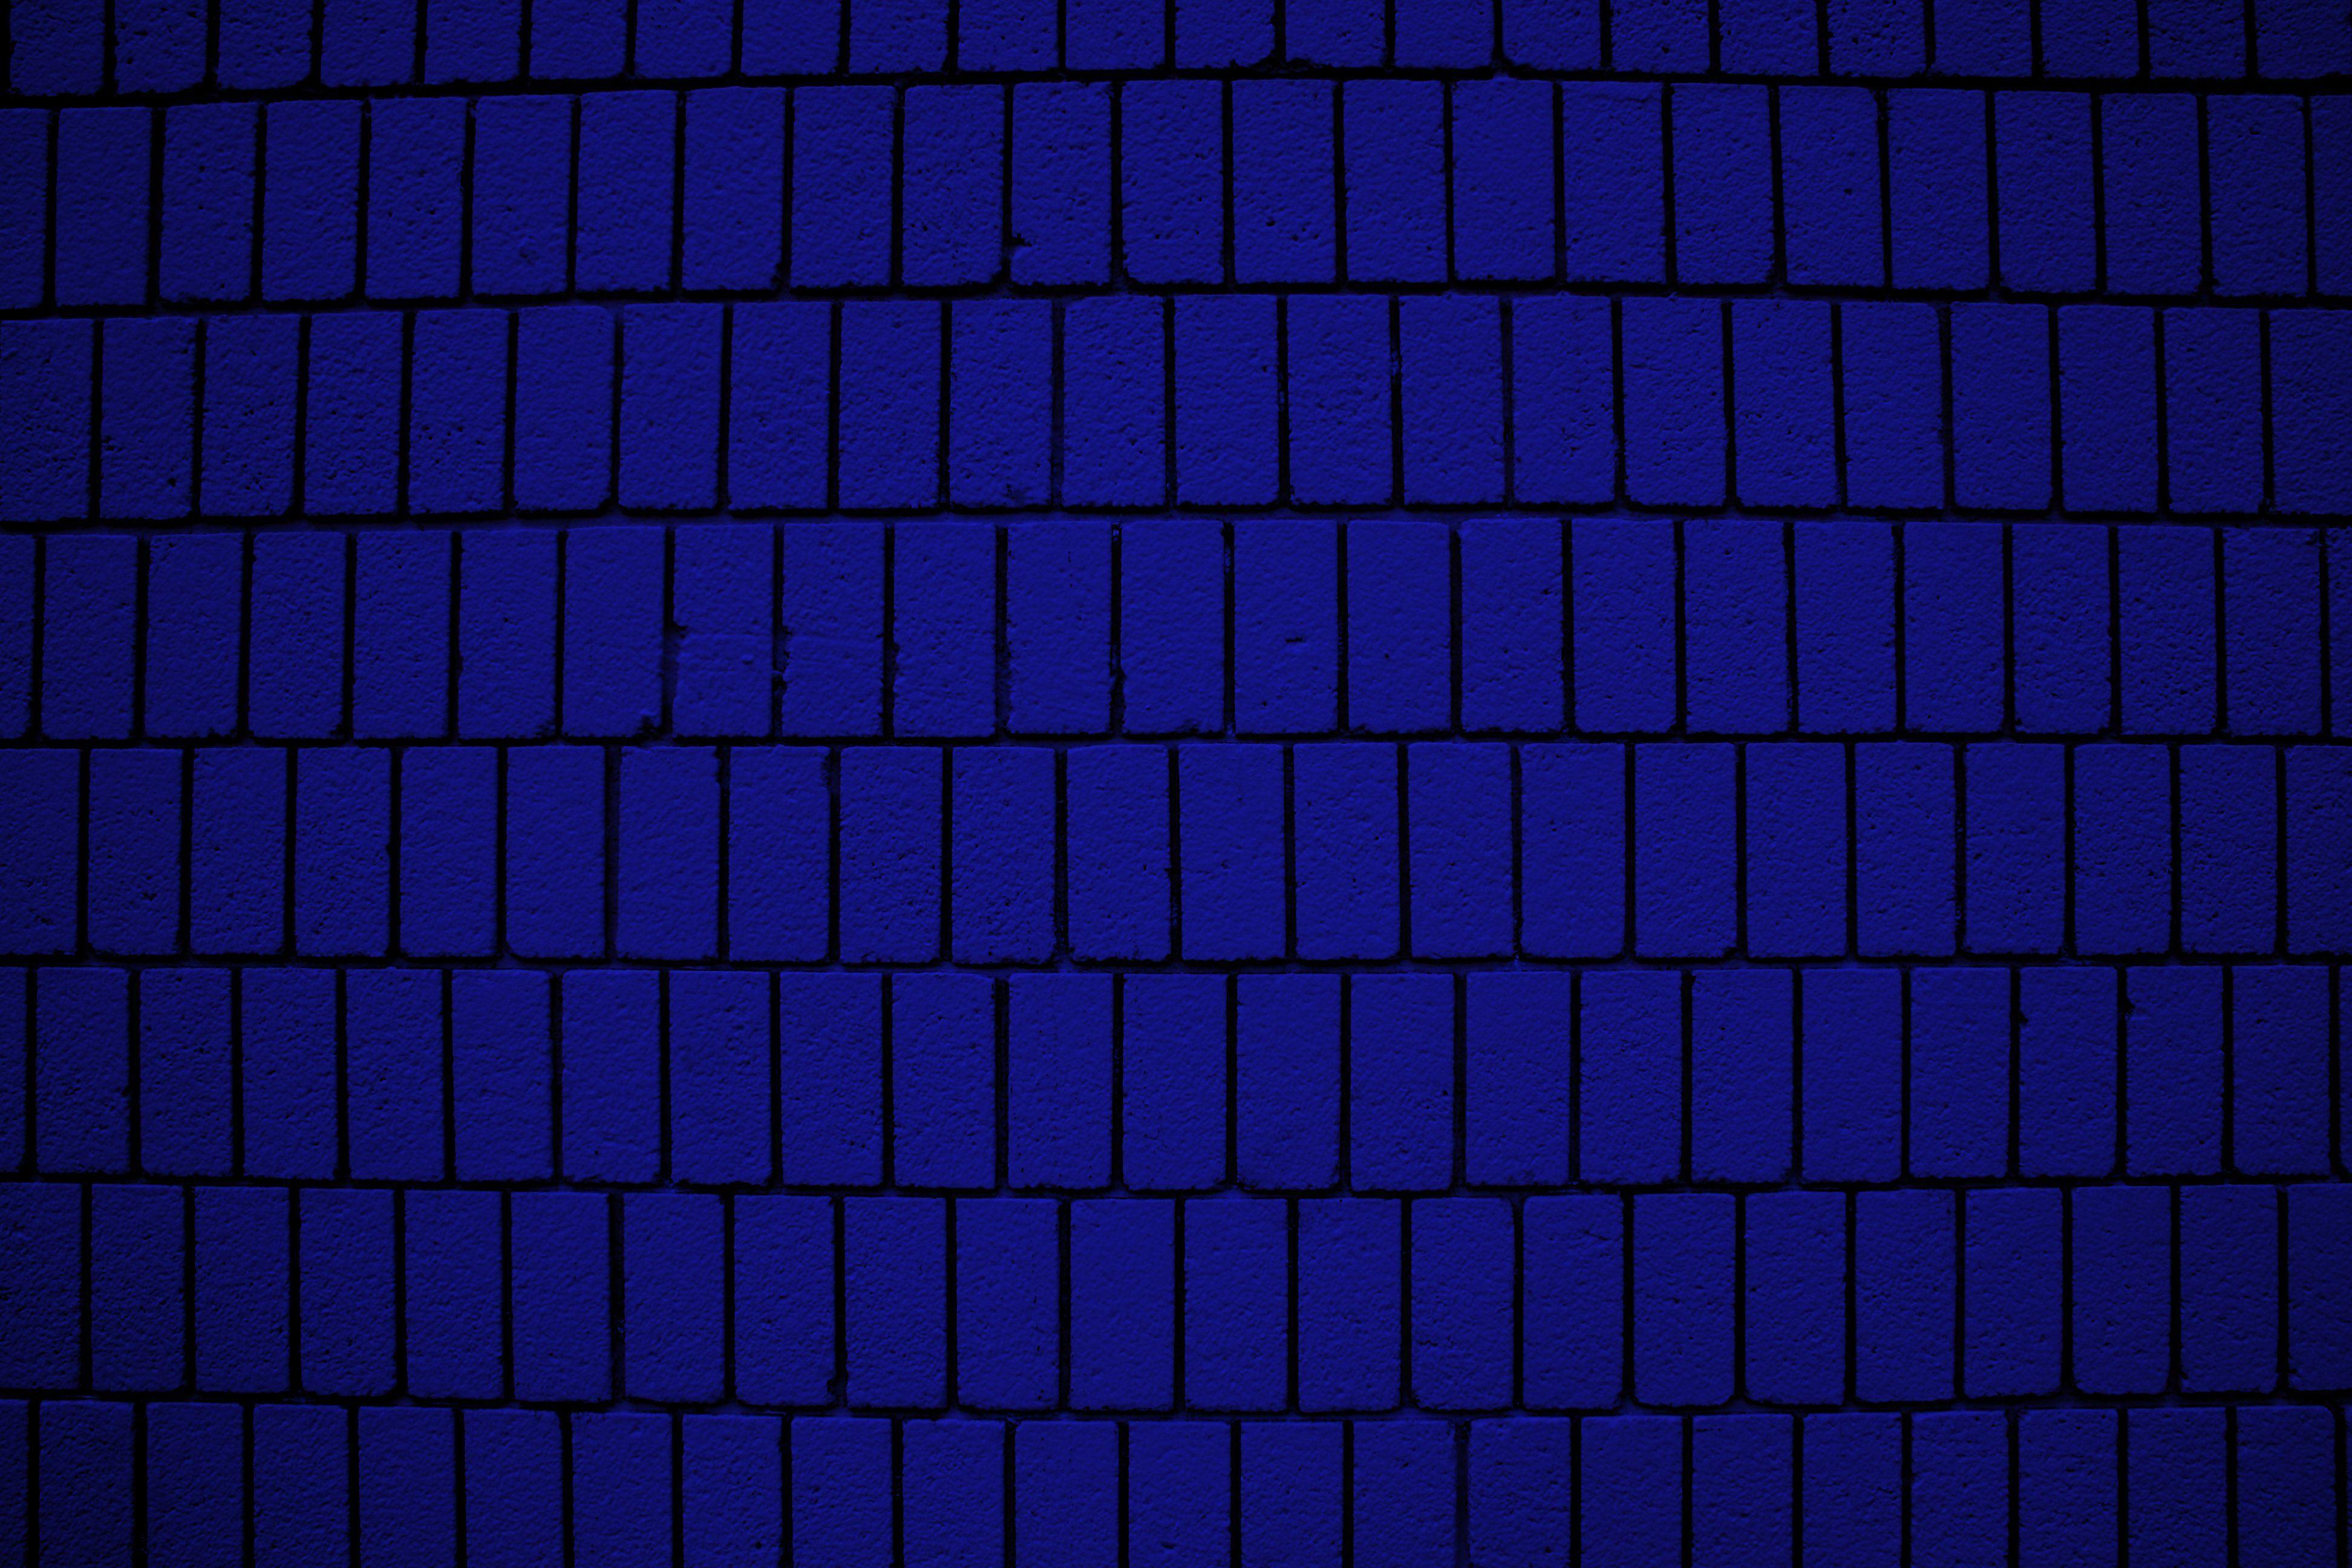 Royal Blue Brick Wall Texture with Vertical Bricks Picture. Free